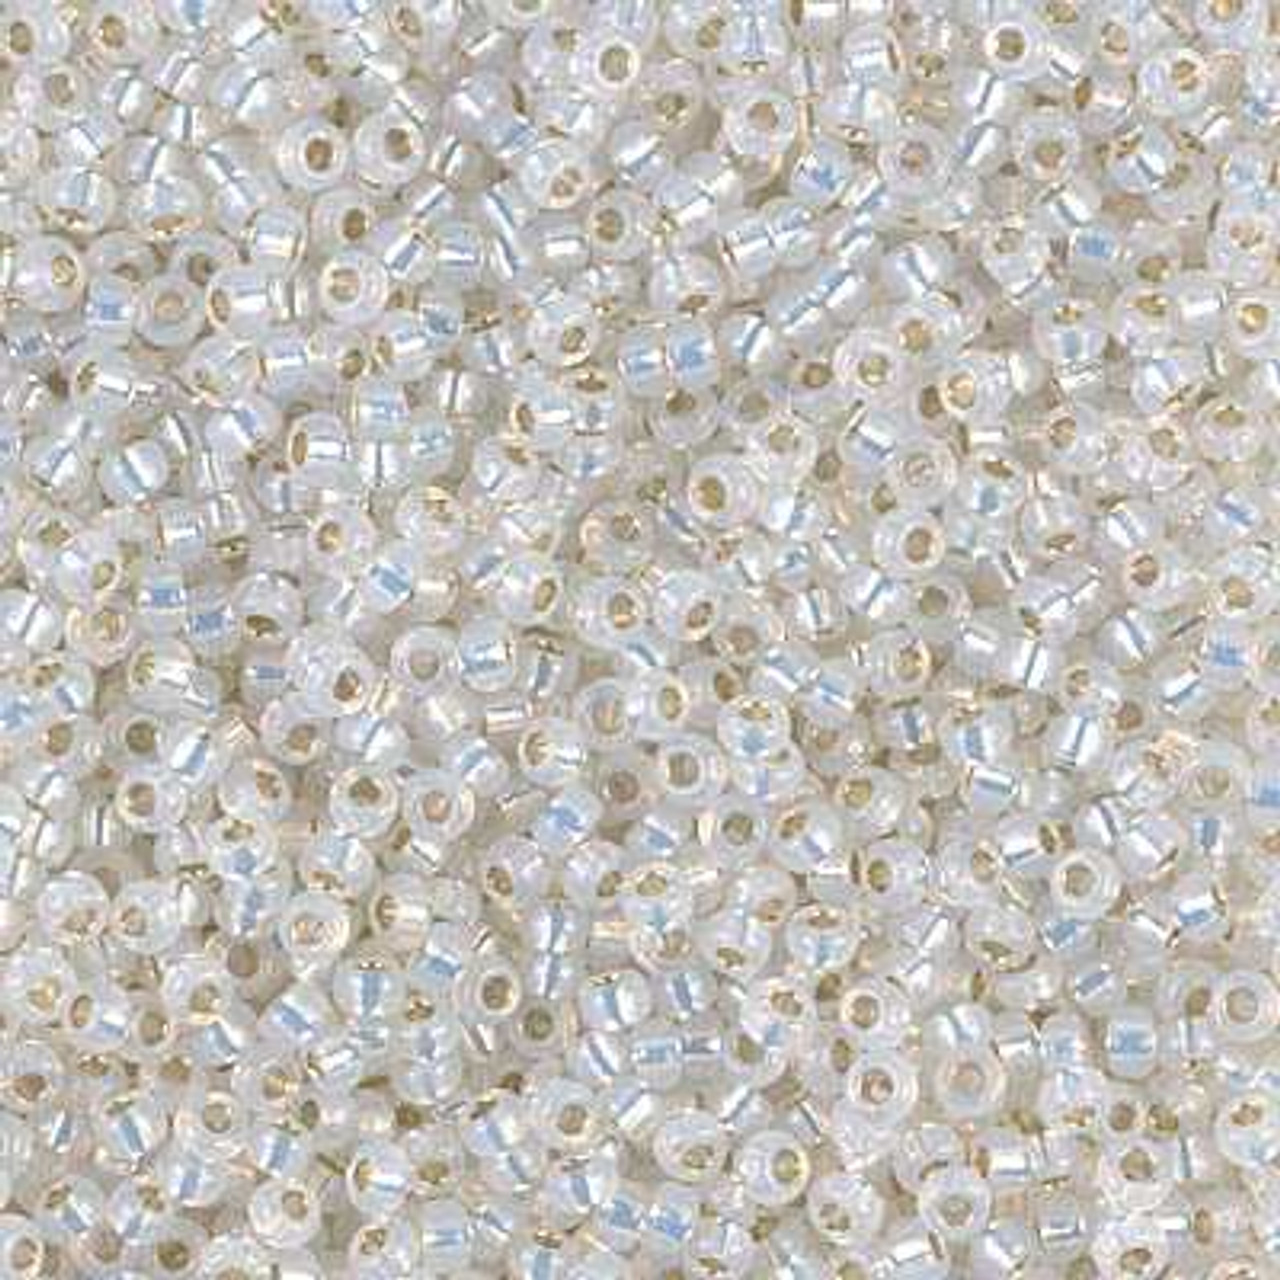 OUTLET 250g Round Druck Beads, 3 mm, Opal White (111-19001-03x03-01000 –